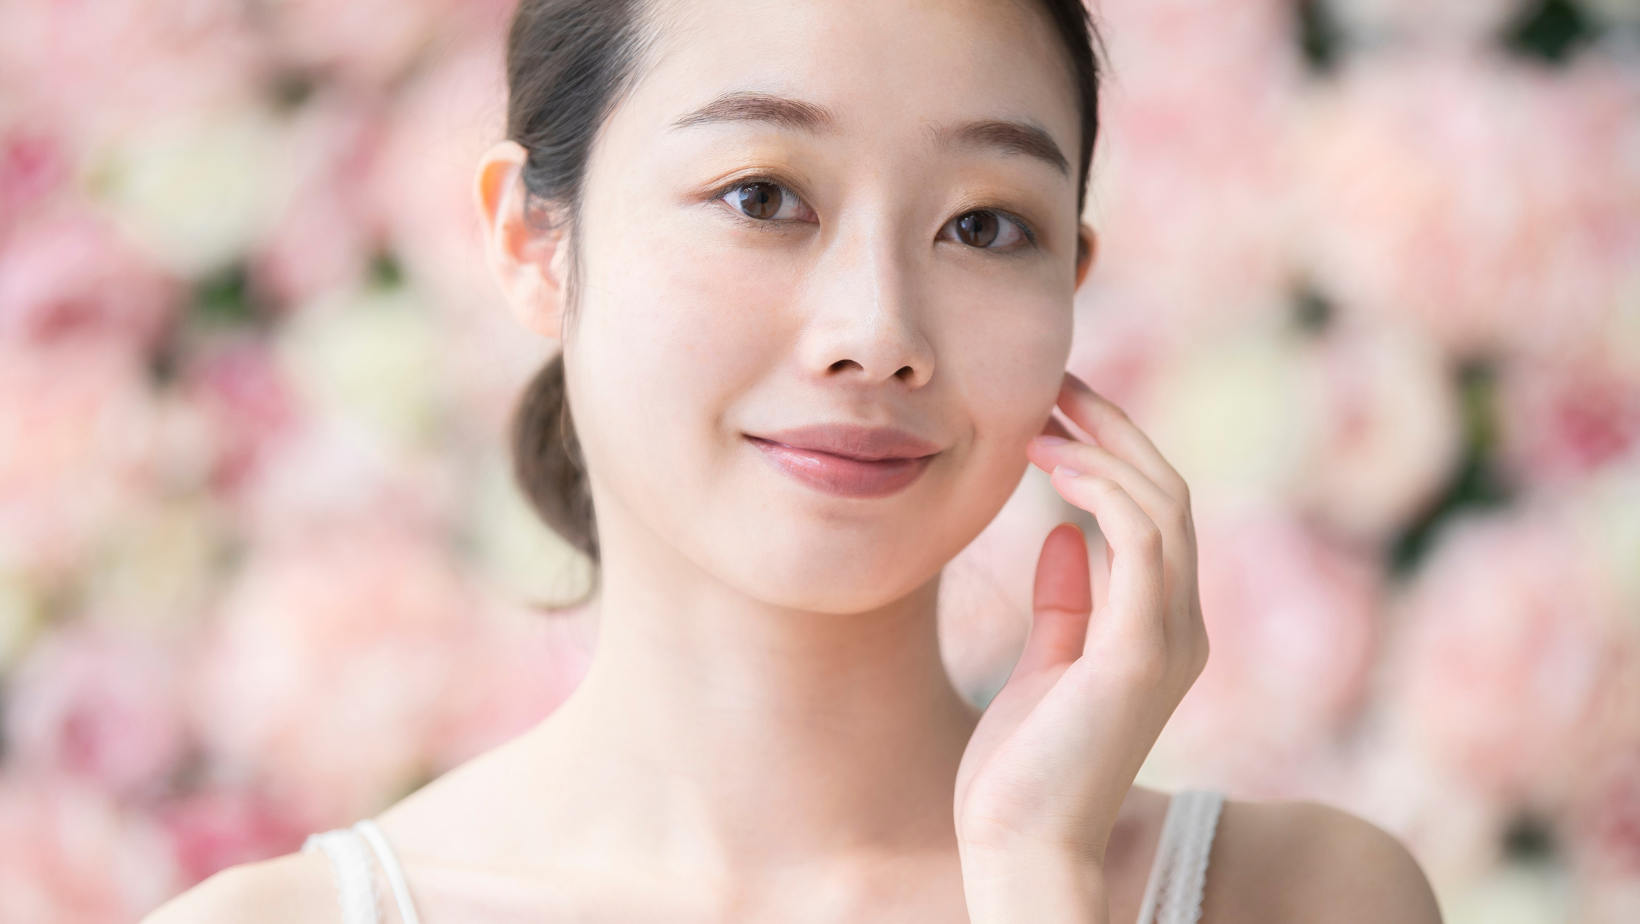 Japanese Beauty Rituals for Flawless, Translucent, Younger-Looking Skin